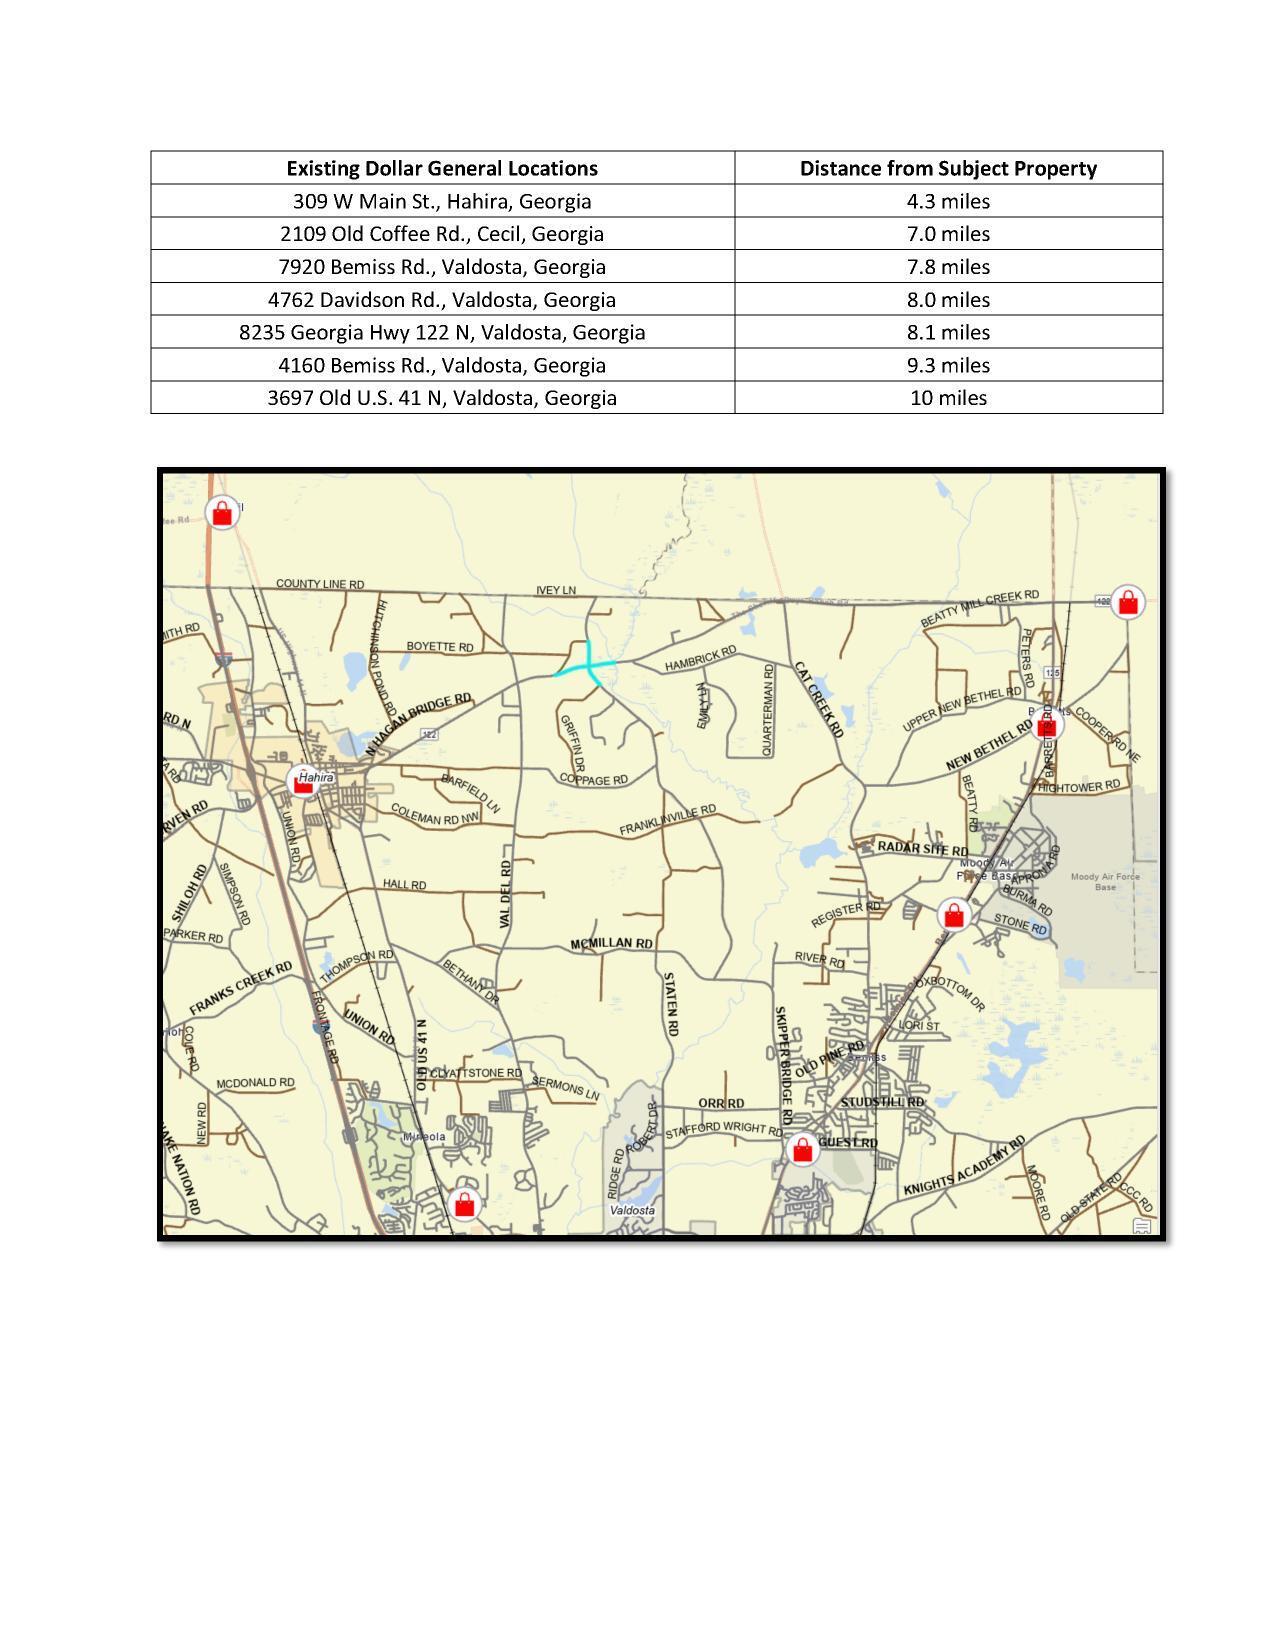 Table of existing Dollar General locations and distances